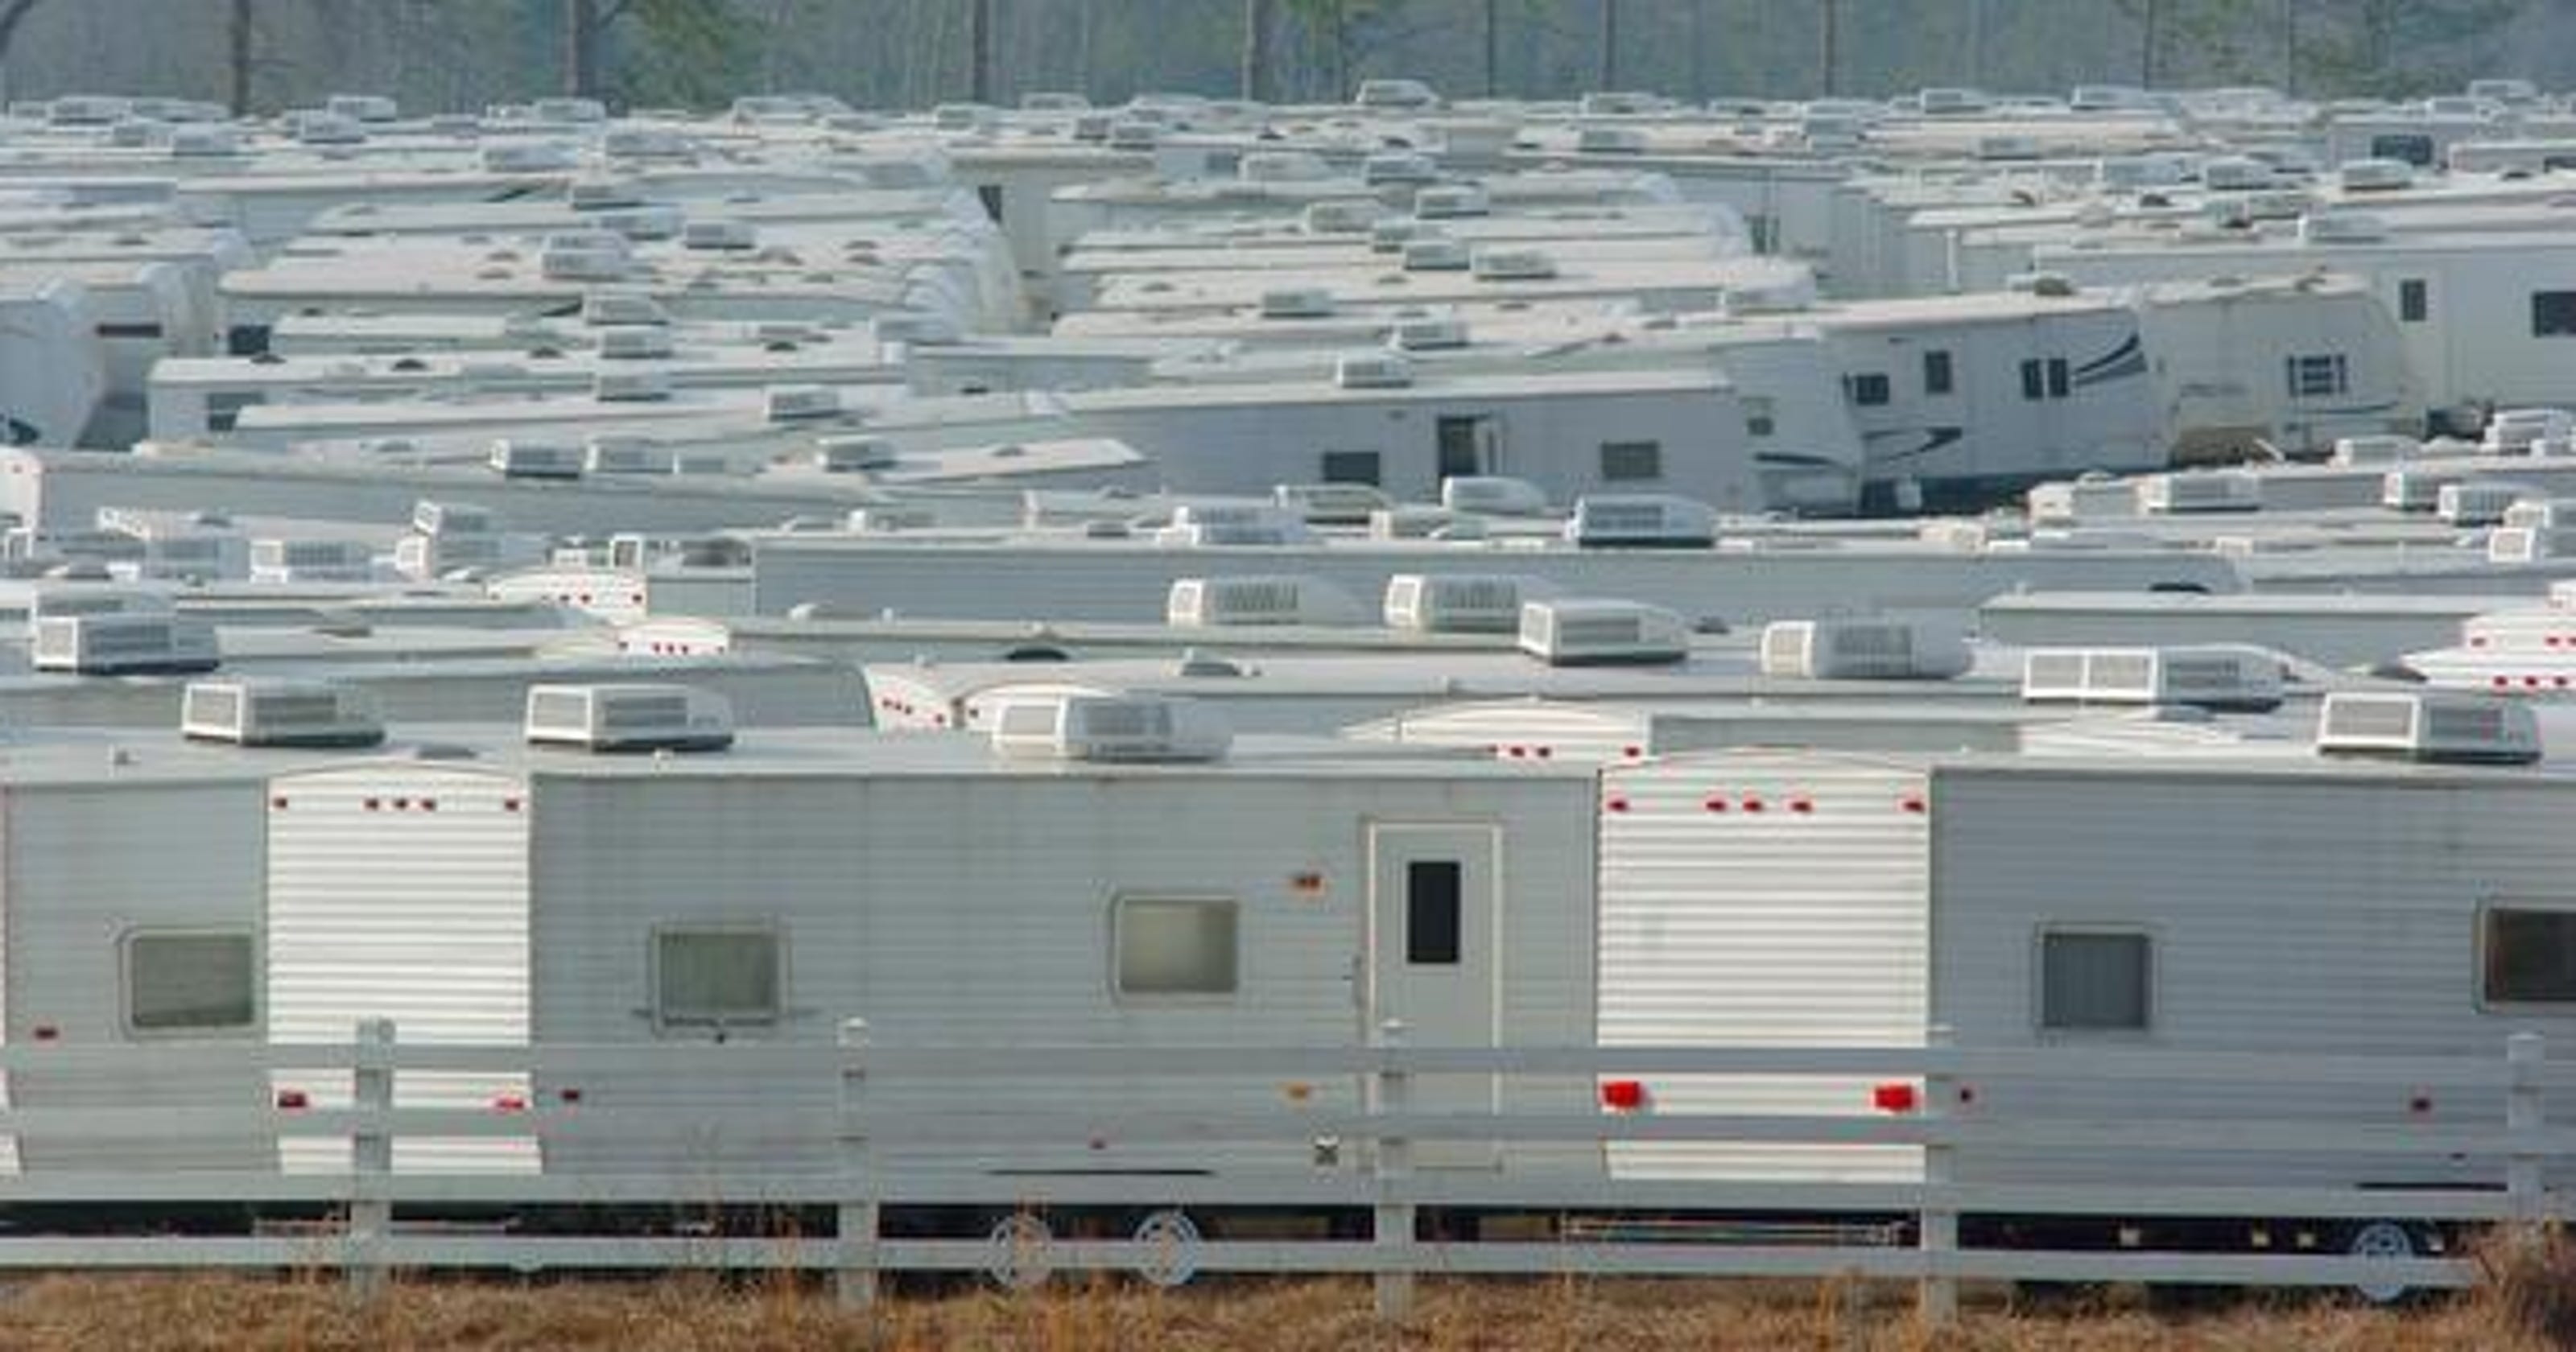 Fema Trailers Brought Shelter Problems To Katrina Victims